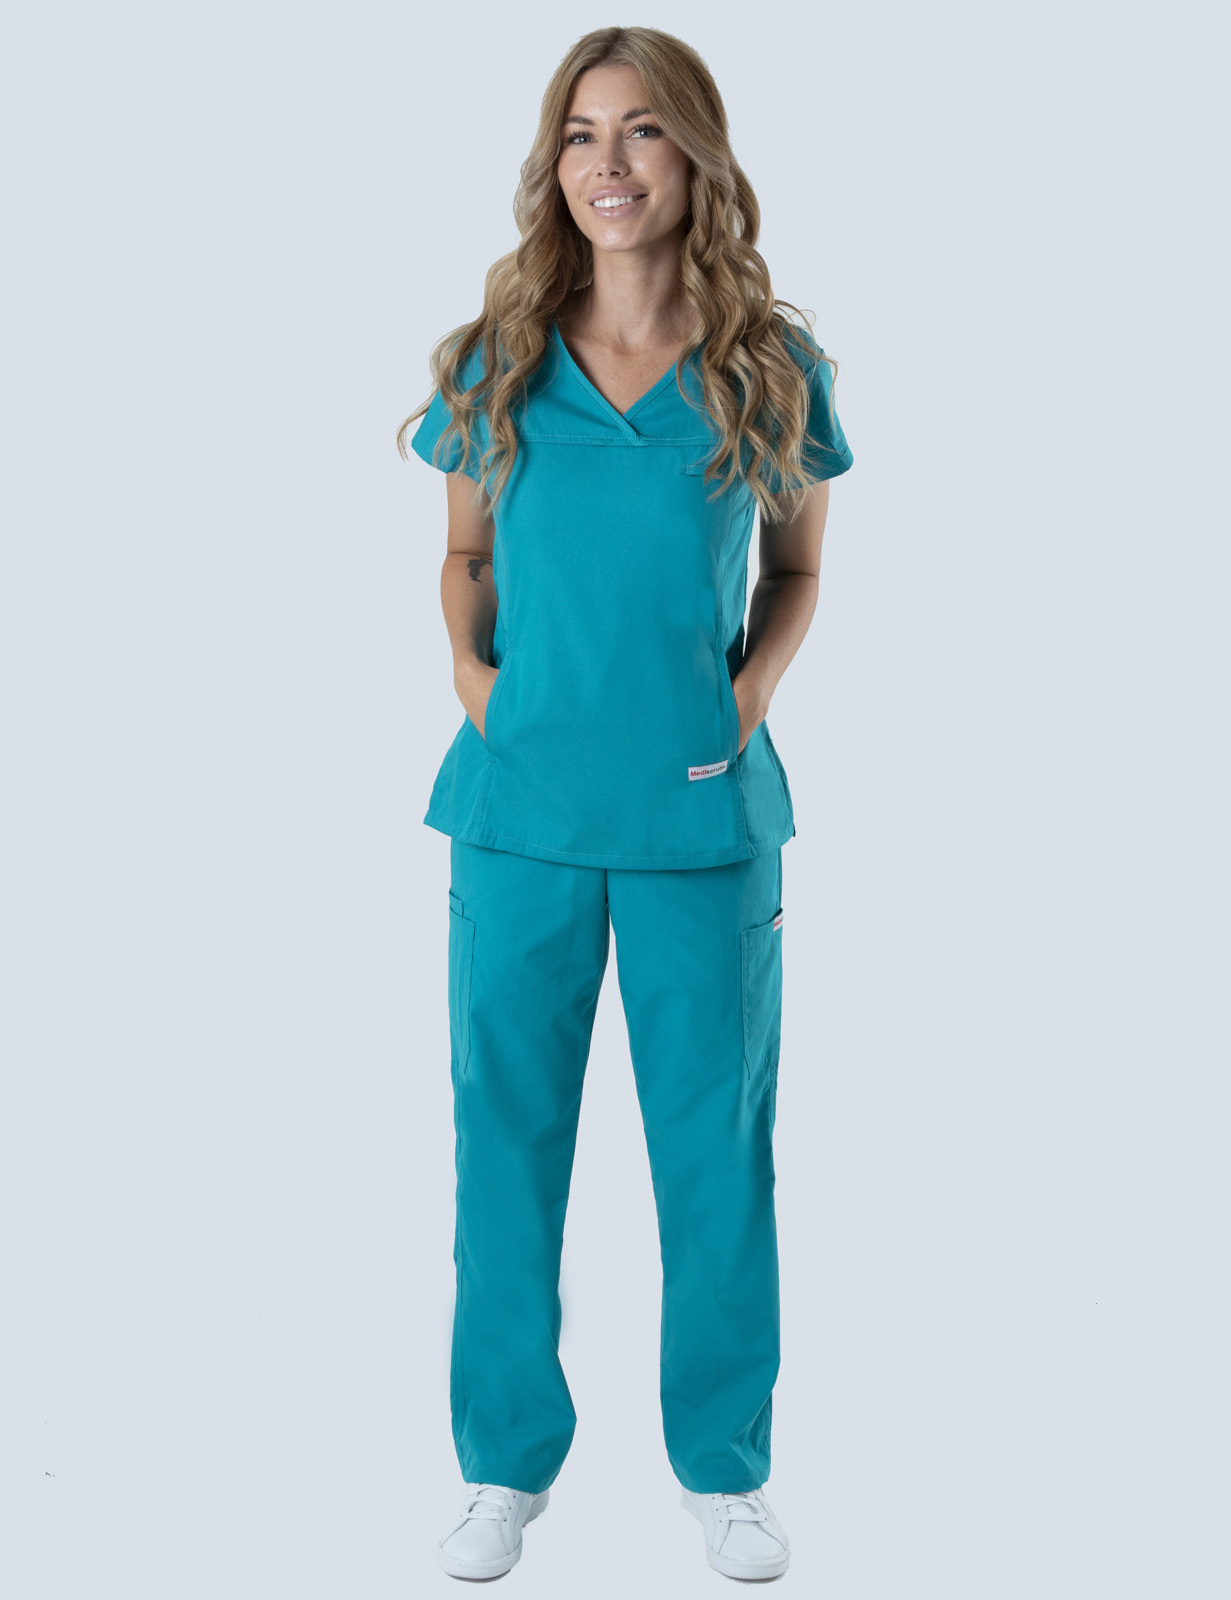 ECT Anaesthetic Technician Uniform Set Bundle (Women's Fit Solid Top and Cargo Pants in Royal + Logos)